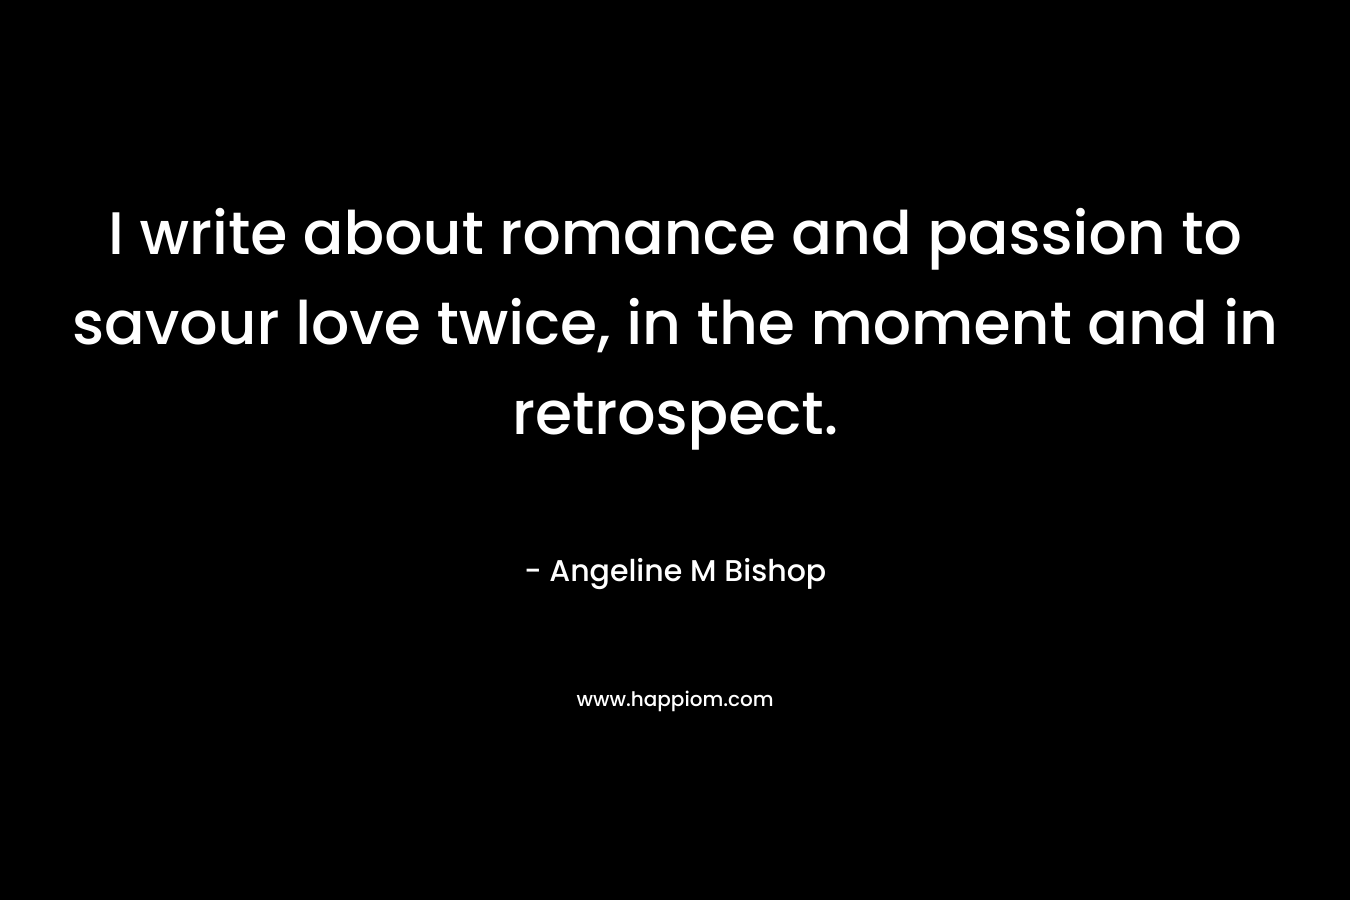 I write about romance and passion to savour love twice, in the moment and in retrospect. – Angeline M Bishop